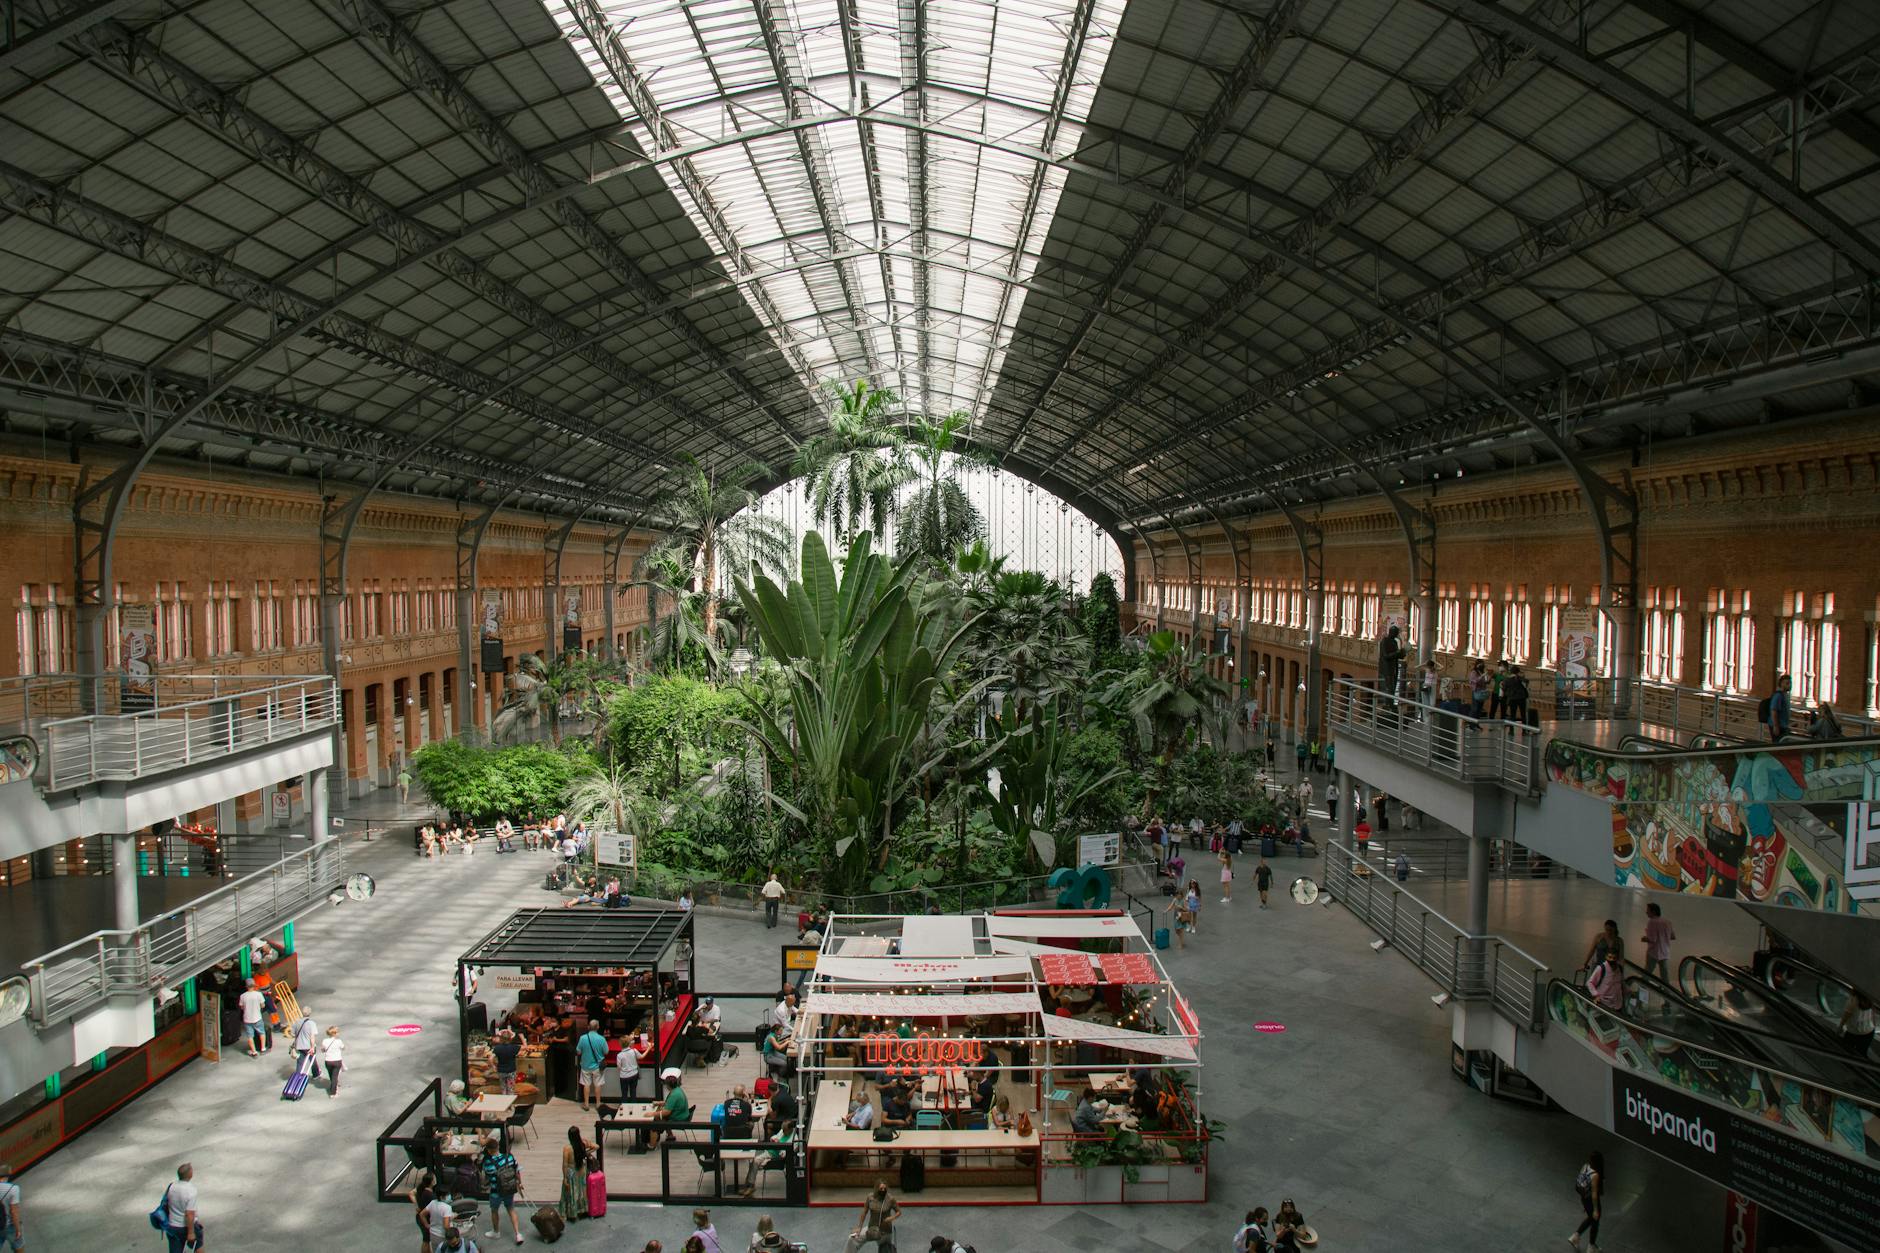 Busy train station with a botanical garden in the center